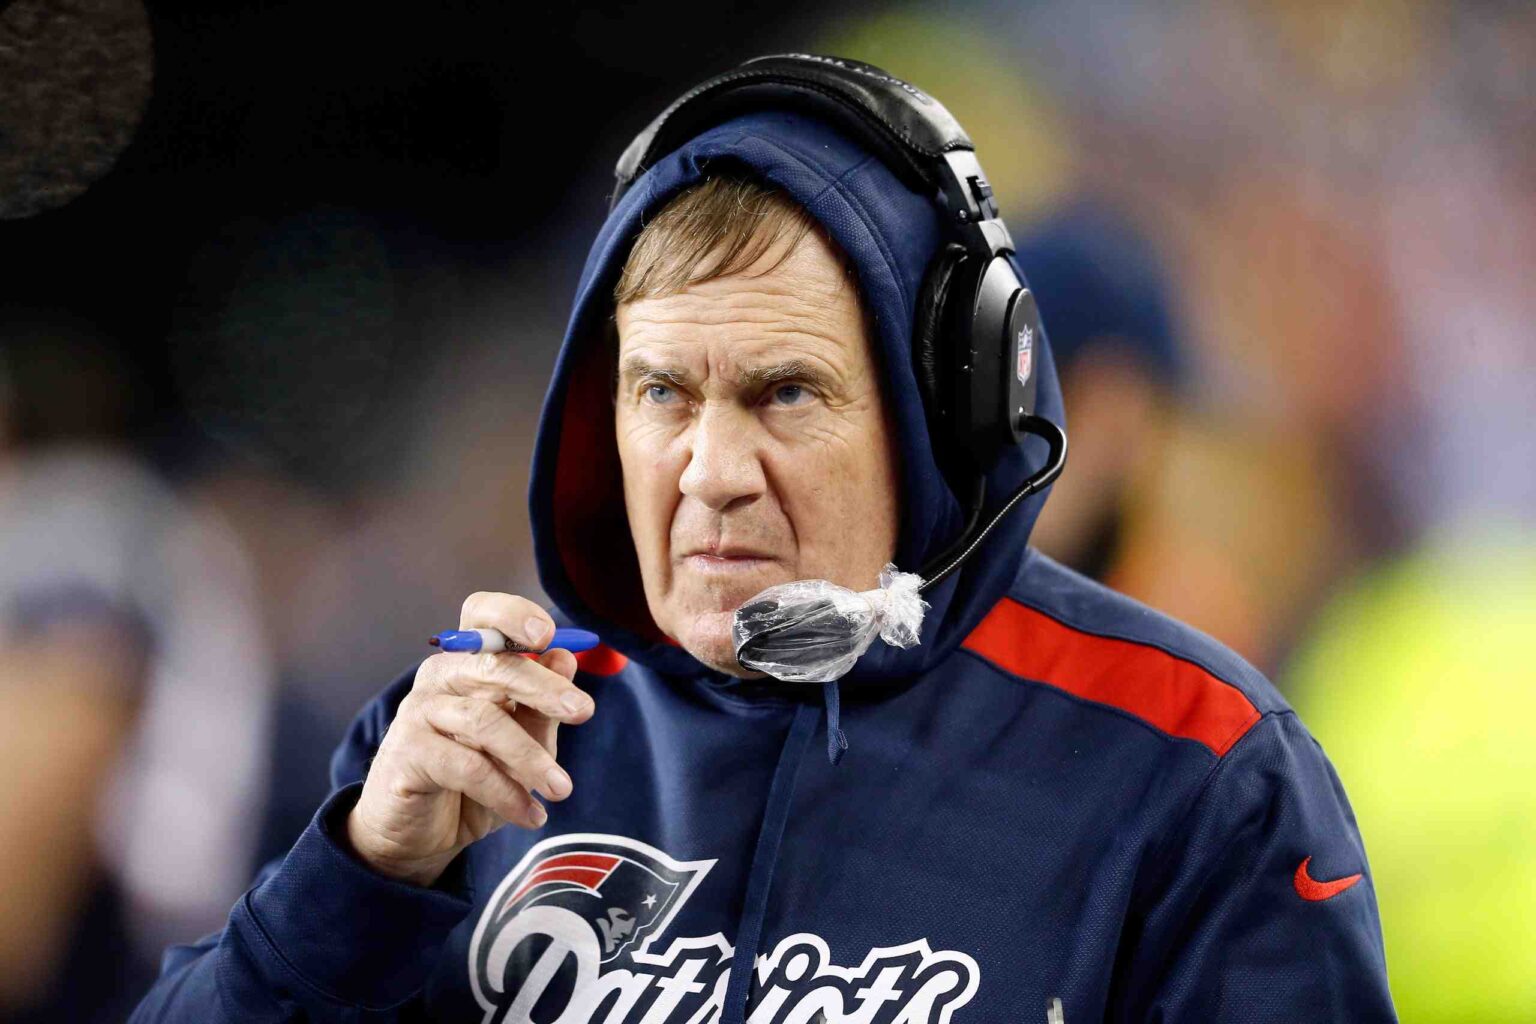 Is Bill Belichick bidding his empire adieu? Get the inside track on rumors of a financial hail mary that put "bill belichick net worth" in the limelight. Drama awaits!